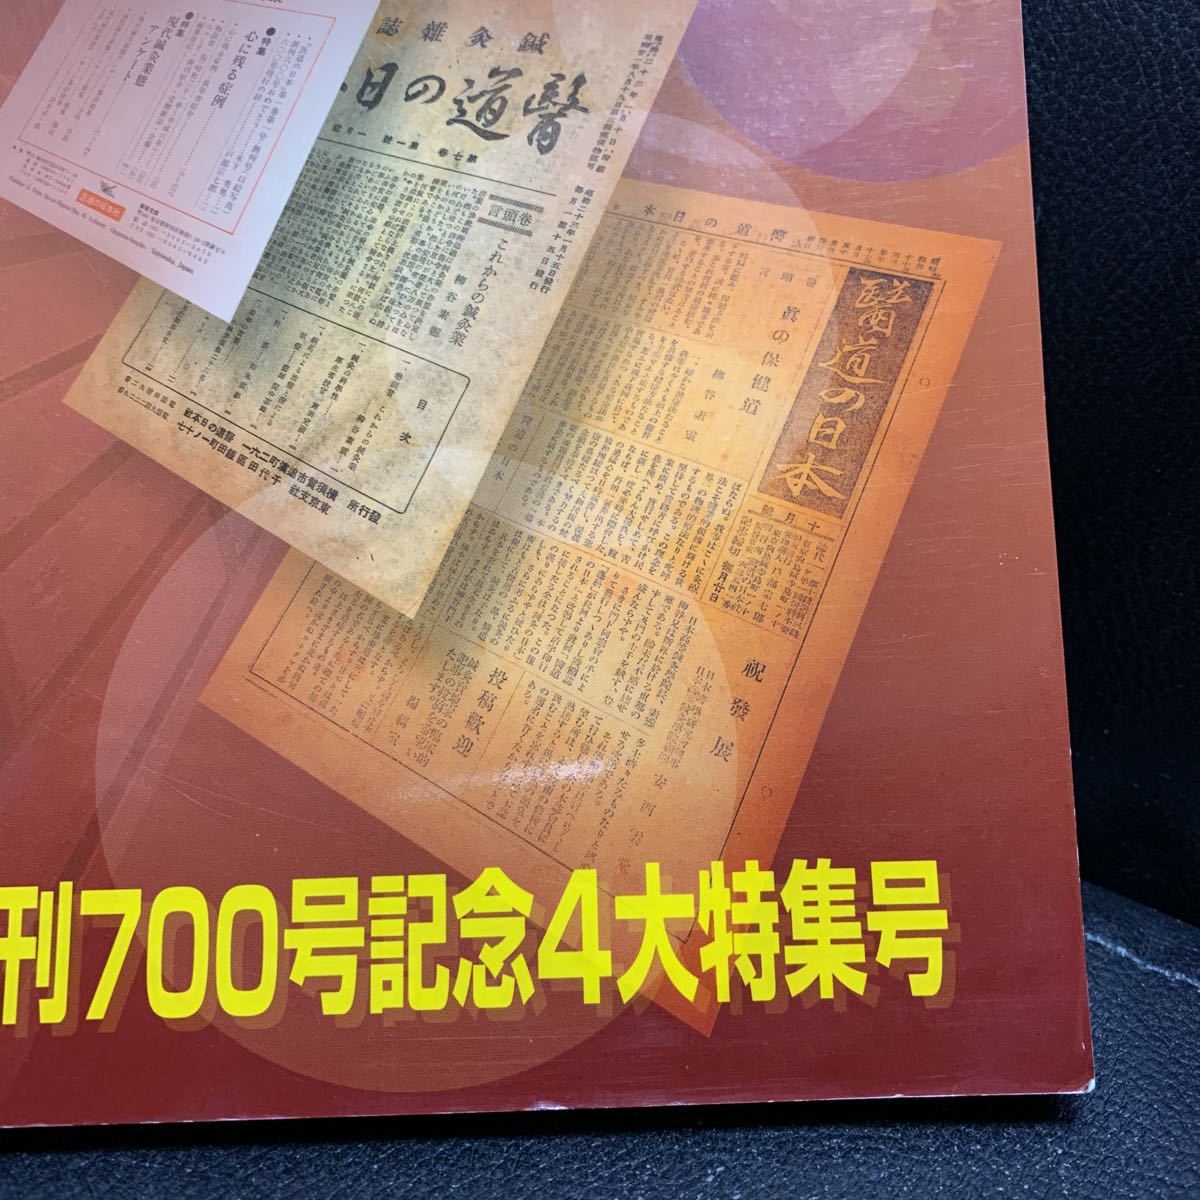 . road. Japan special increase .No.8..700 number memory 4 large special collection number acupuncture moxibustion is .... acupuncture moxibustion ... shiatsu massage therapia .... hole middle medicine traditional Chinese medicine 